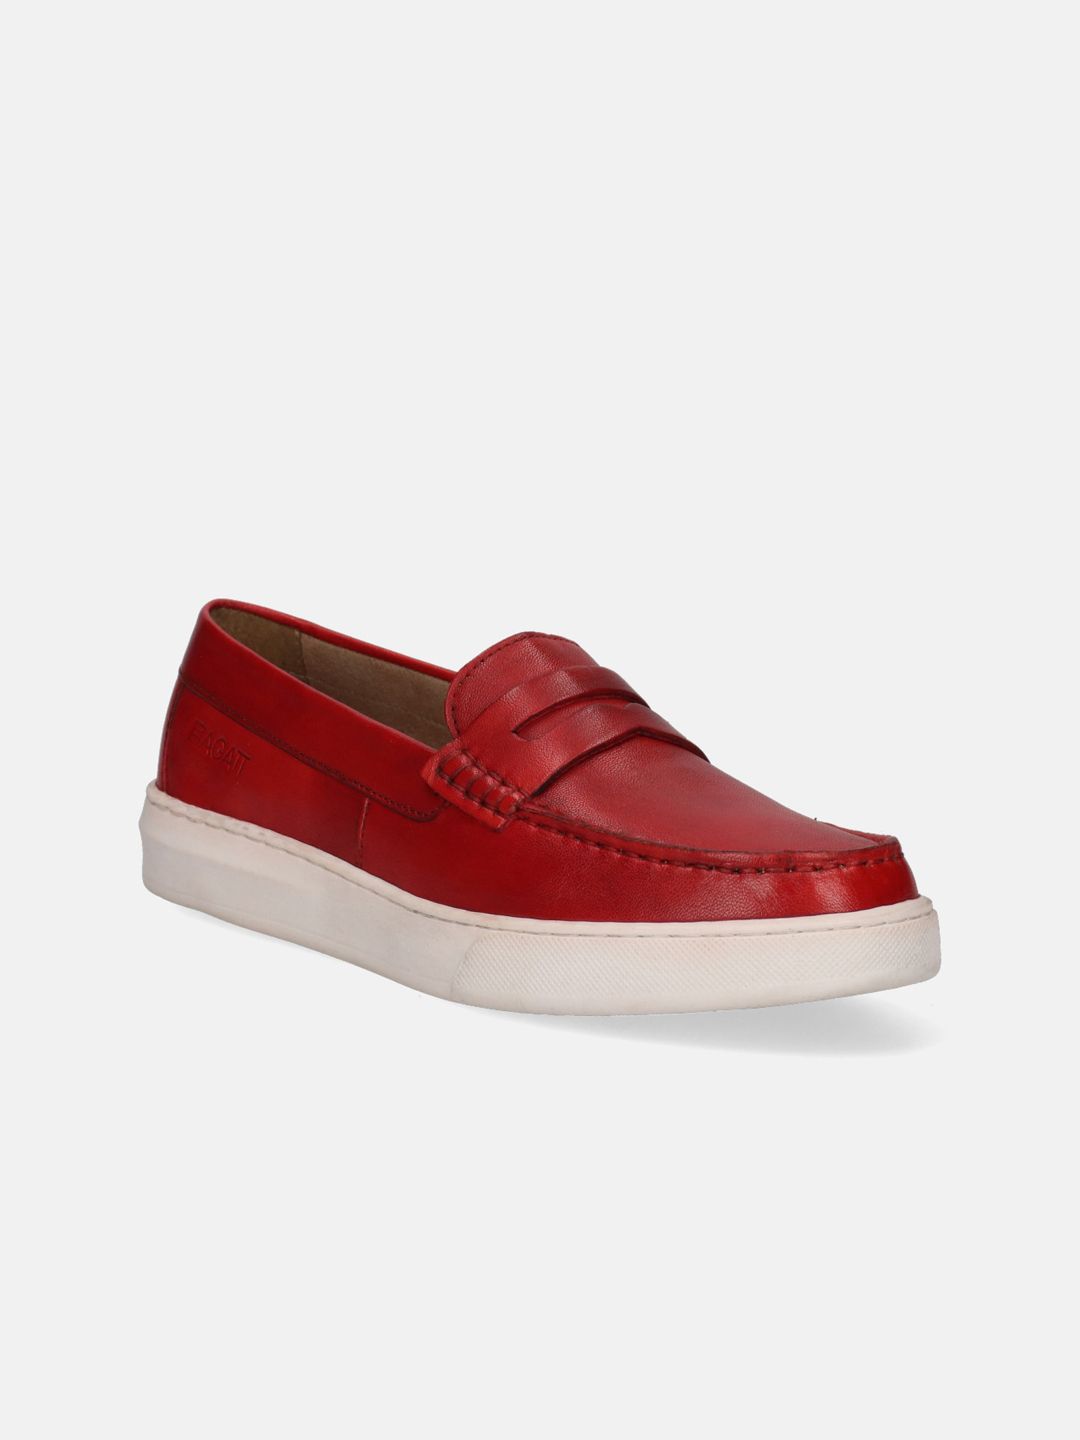 BAGATT Women Red Leather Slip-On Sneakers Price in India